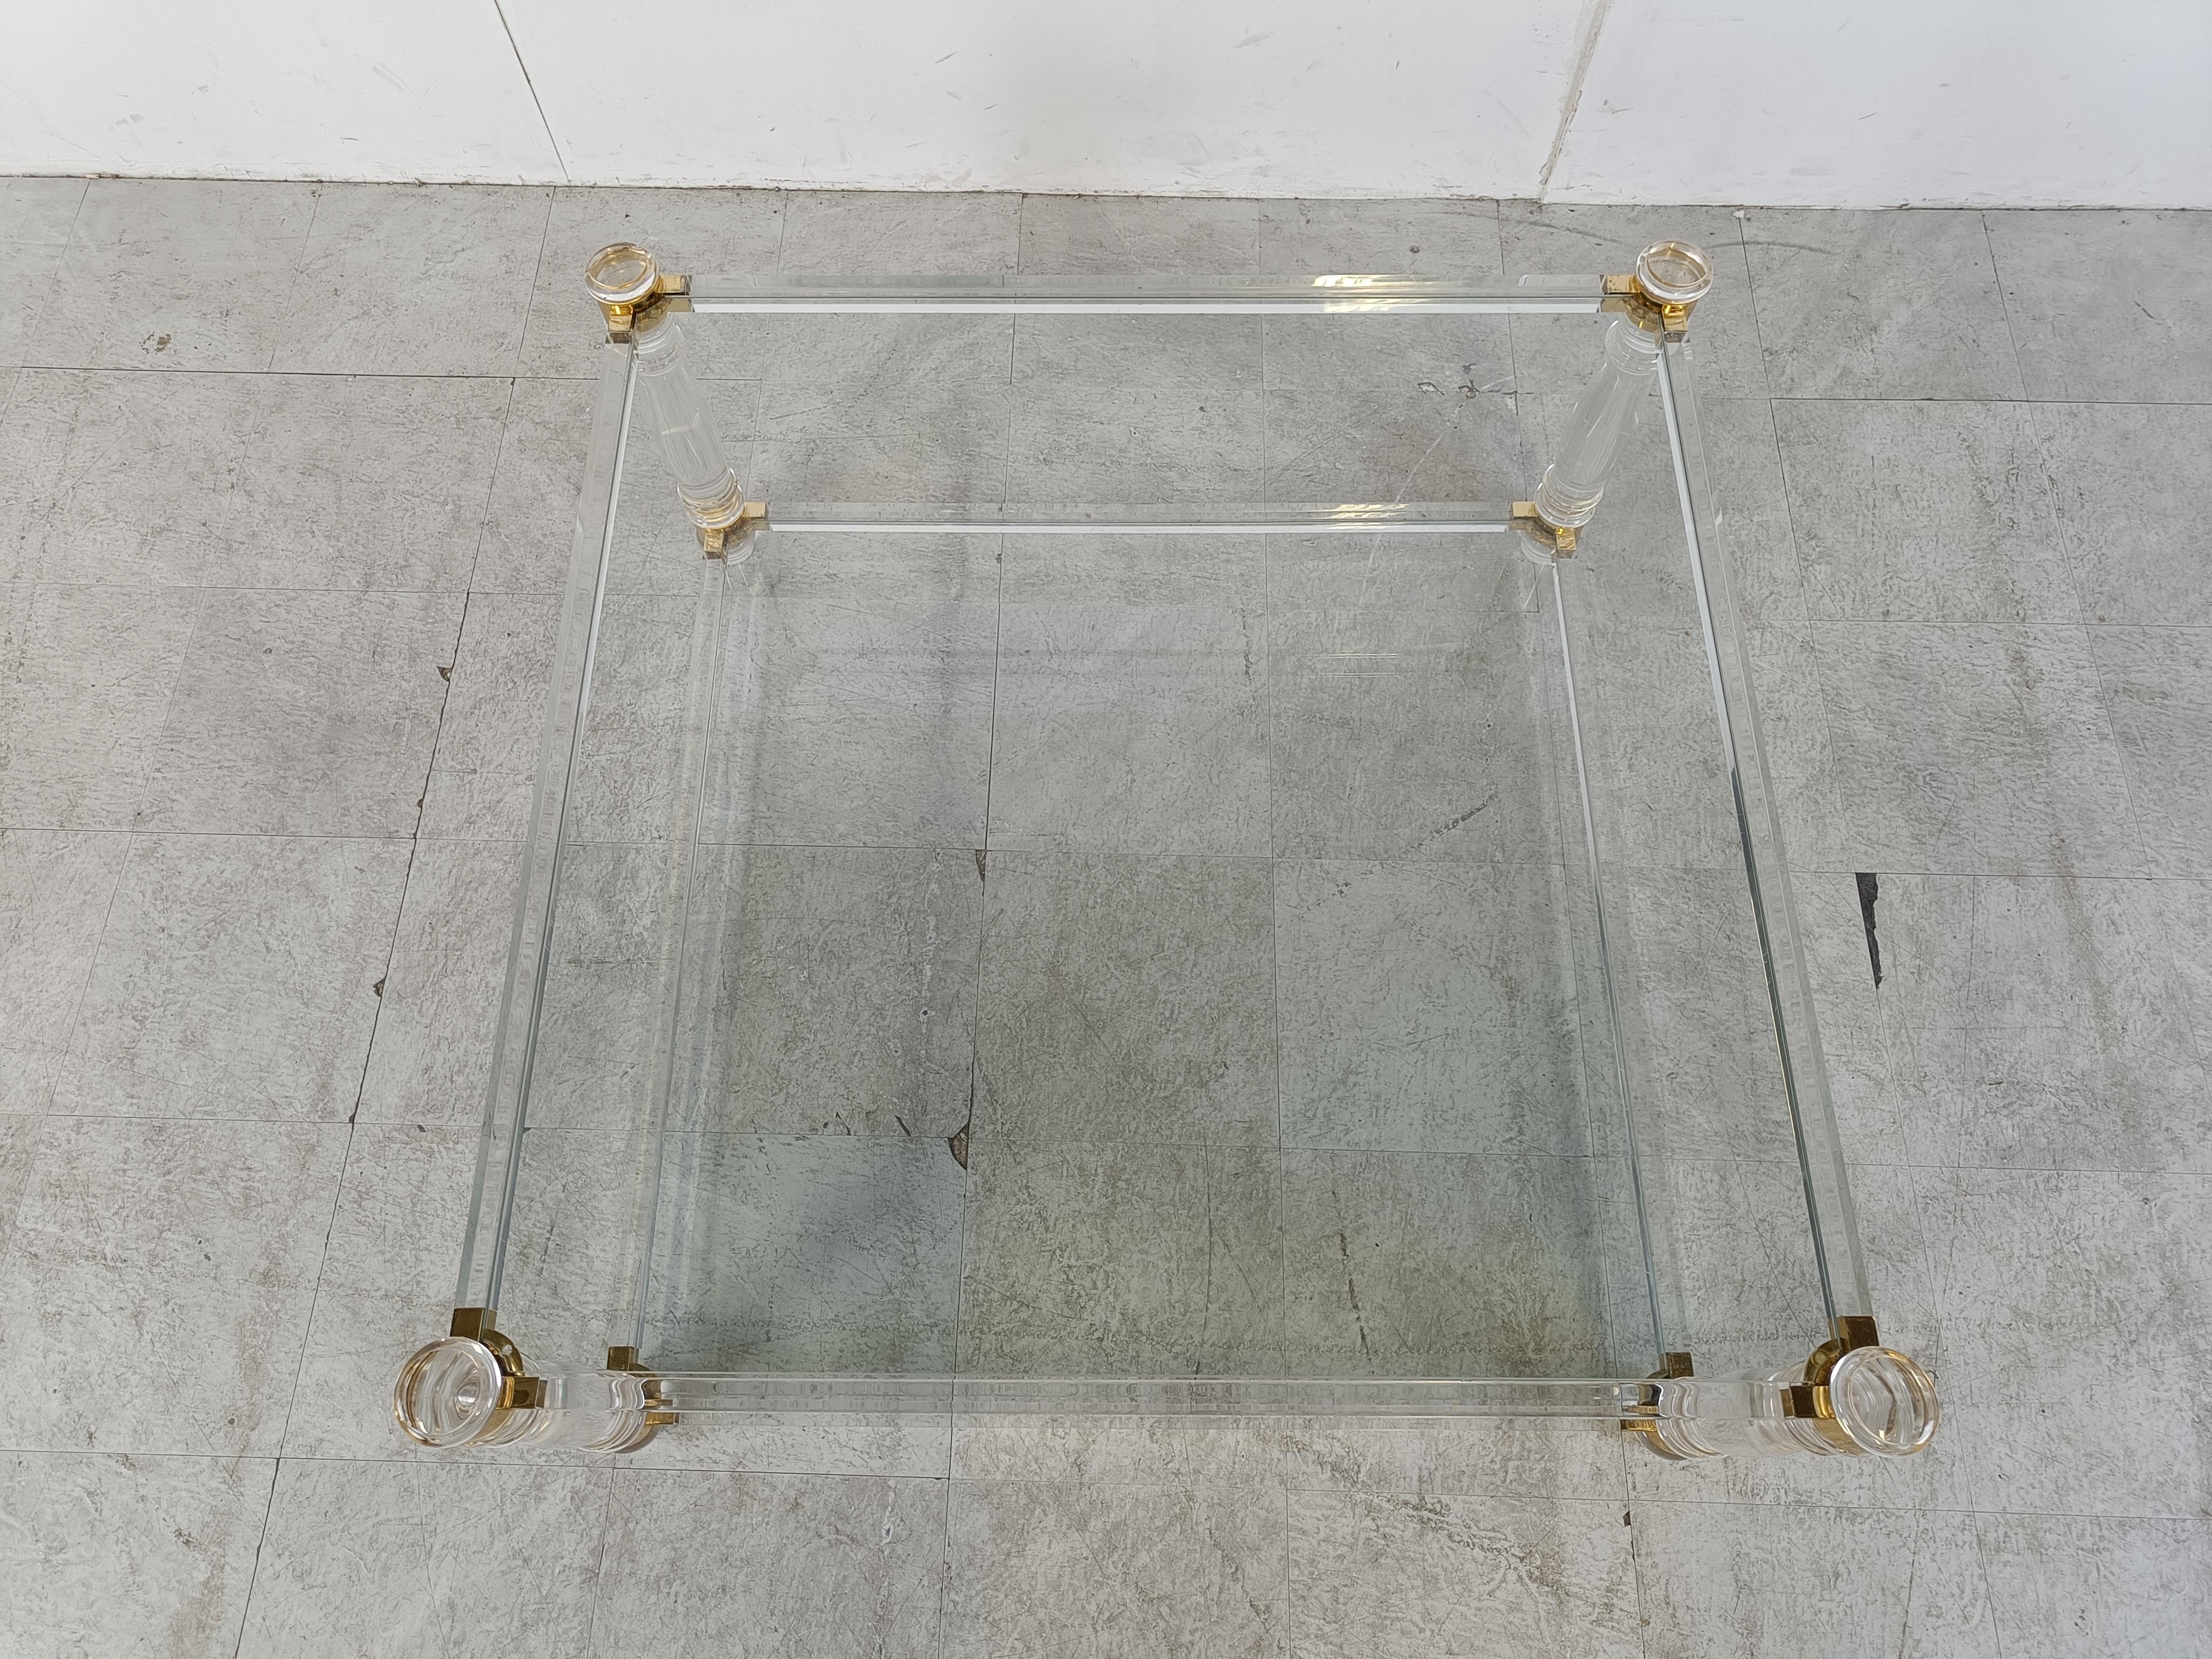 Vintage coffee table with a lucite frame, brass corners and glass plates.

Good condition.

Very modern looking and decorative table that can be combined with lots of interior styles.

Good condition.

1970s - Belgium

Dimensions:
Height: